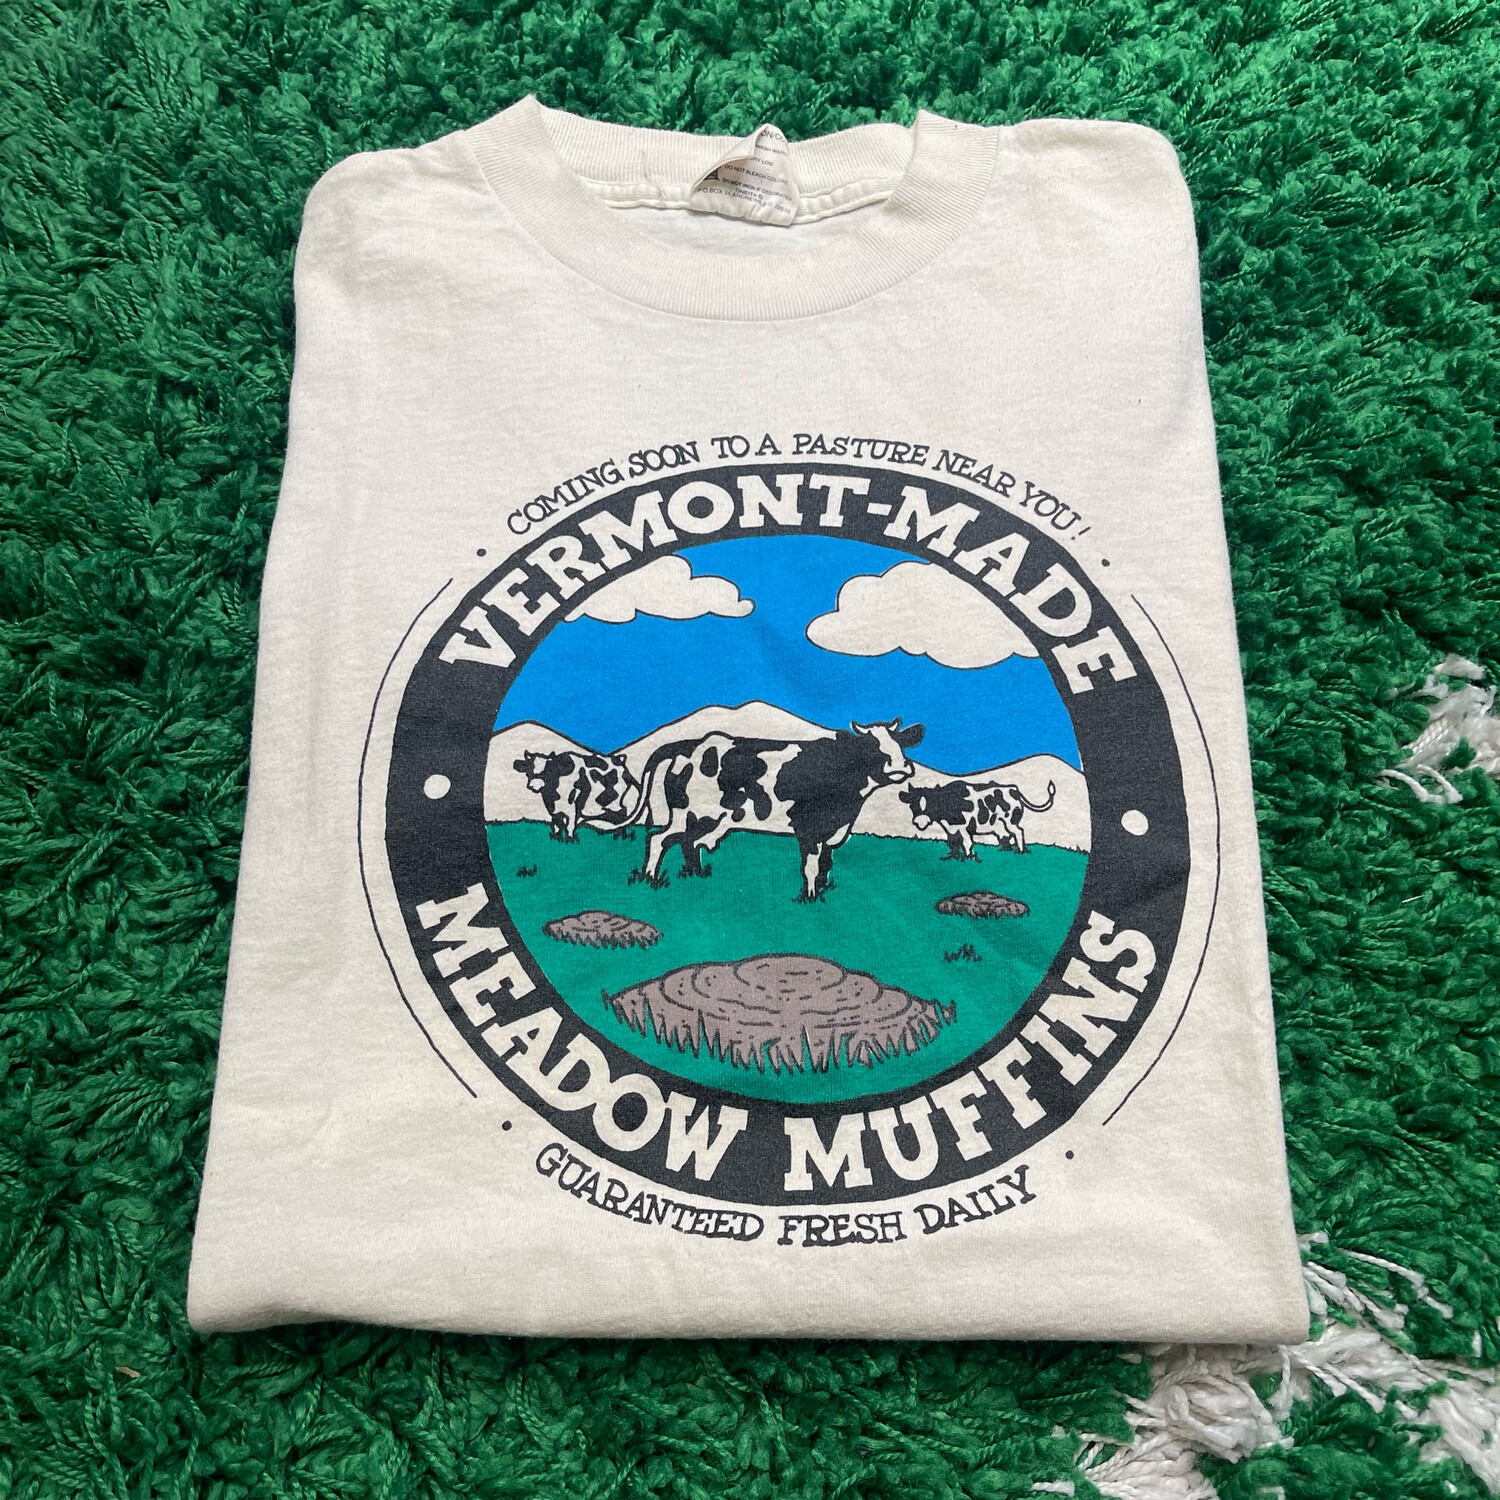 Vermont Made Meadow Muffins Tee Size Medium 